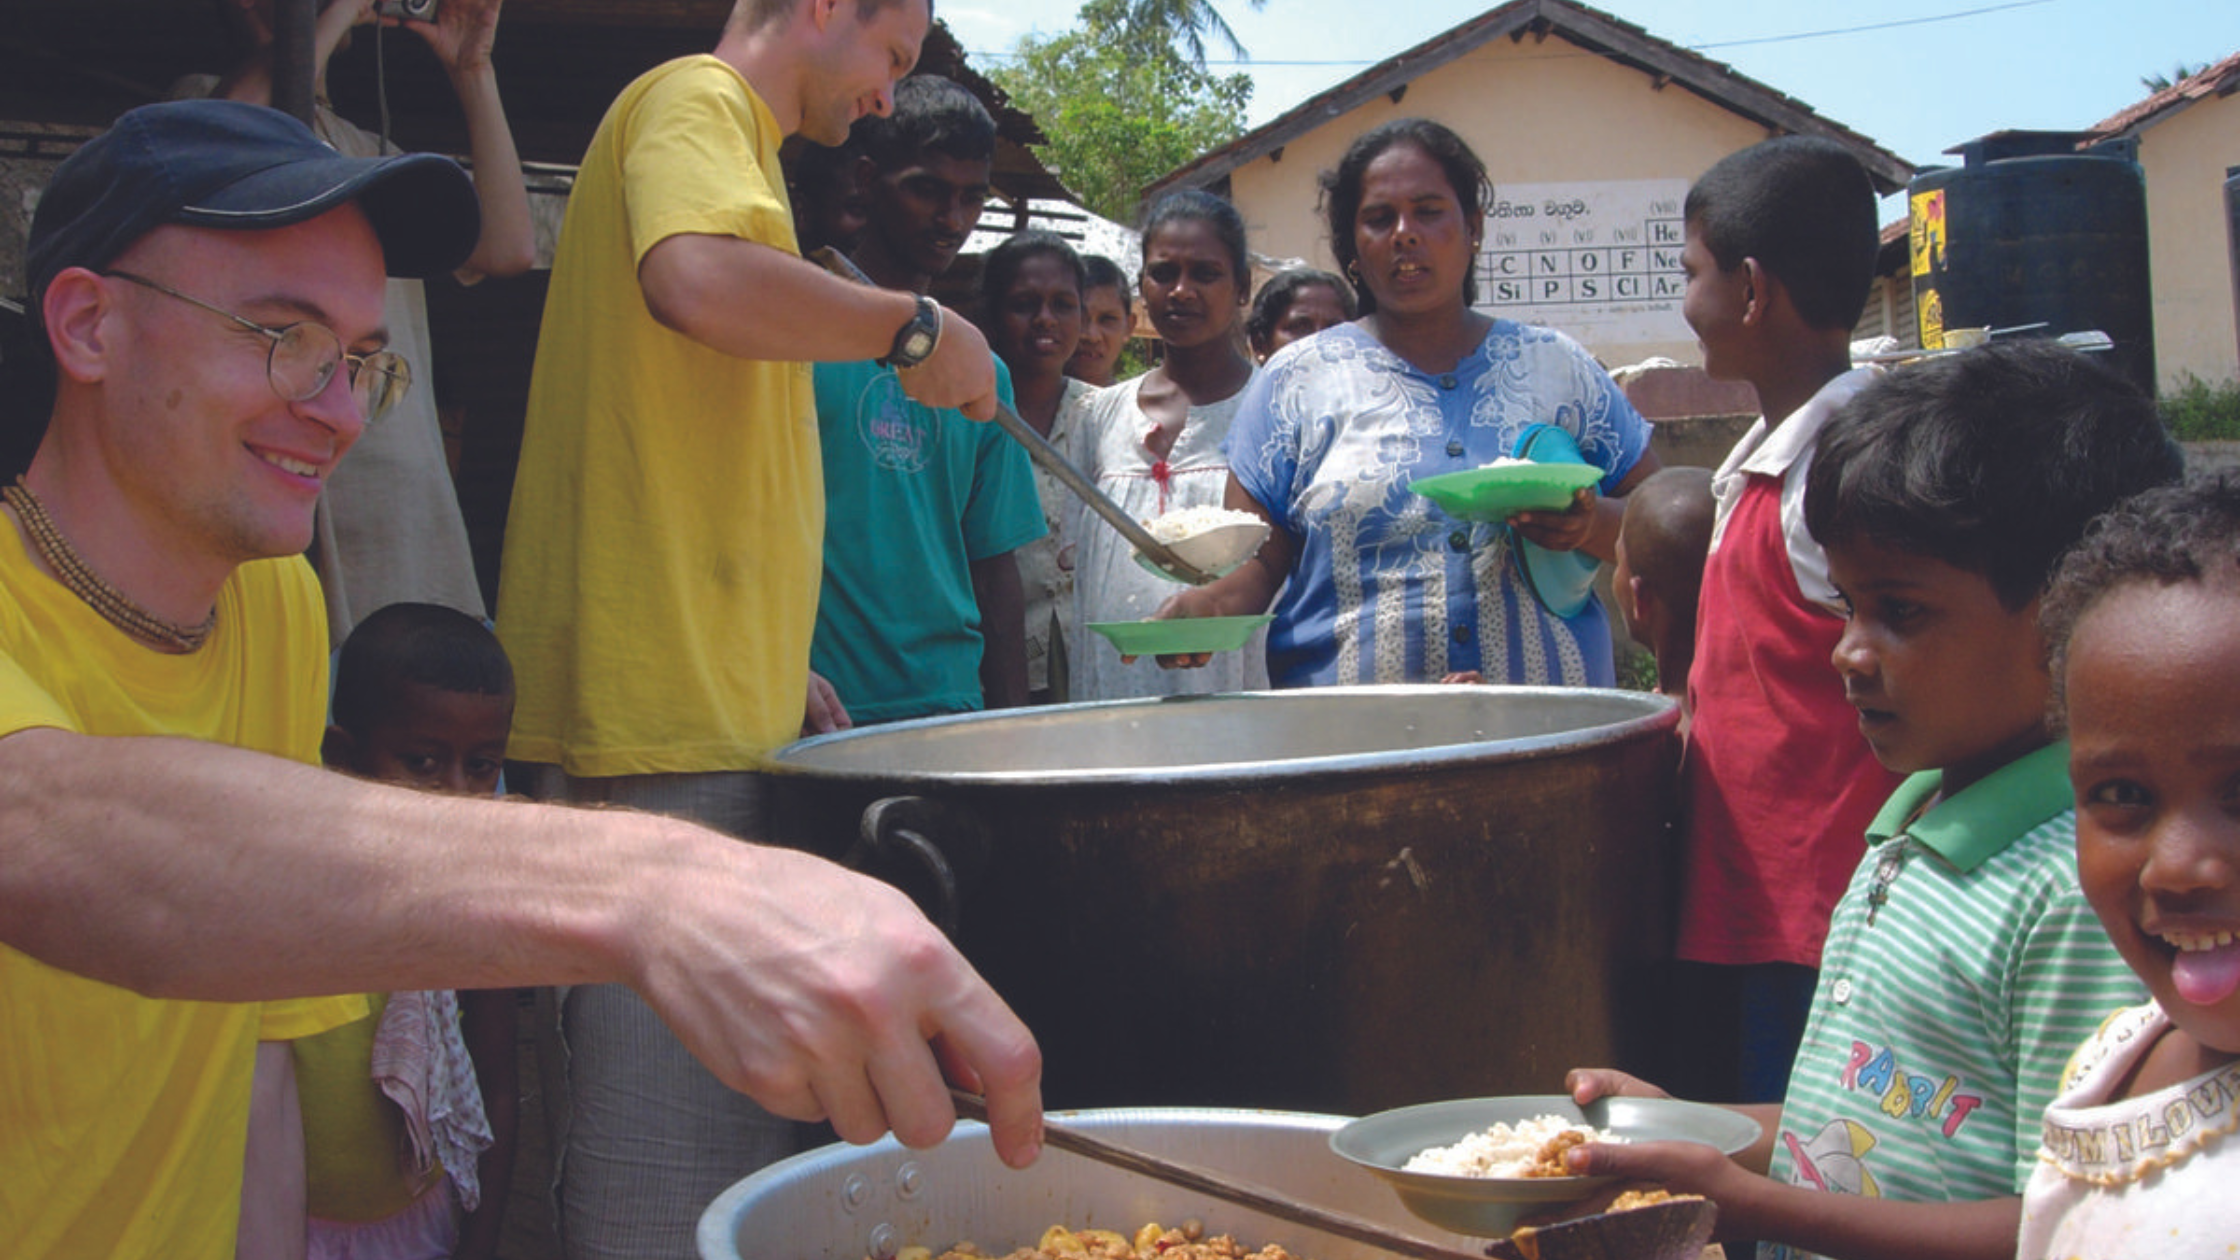 Serving food in a remote community area